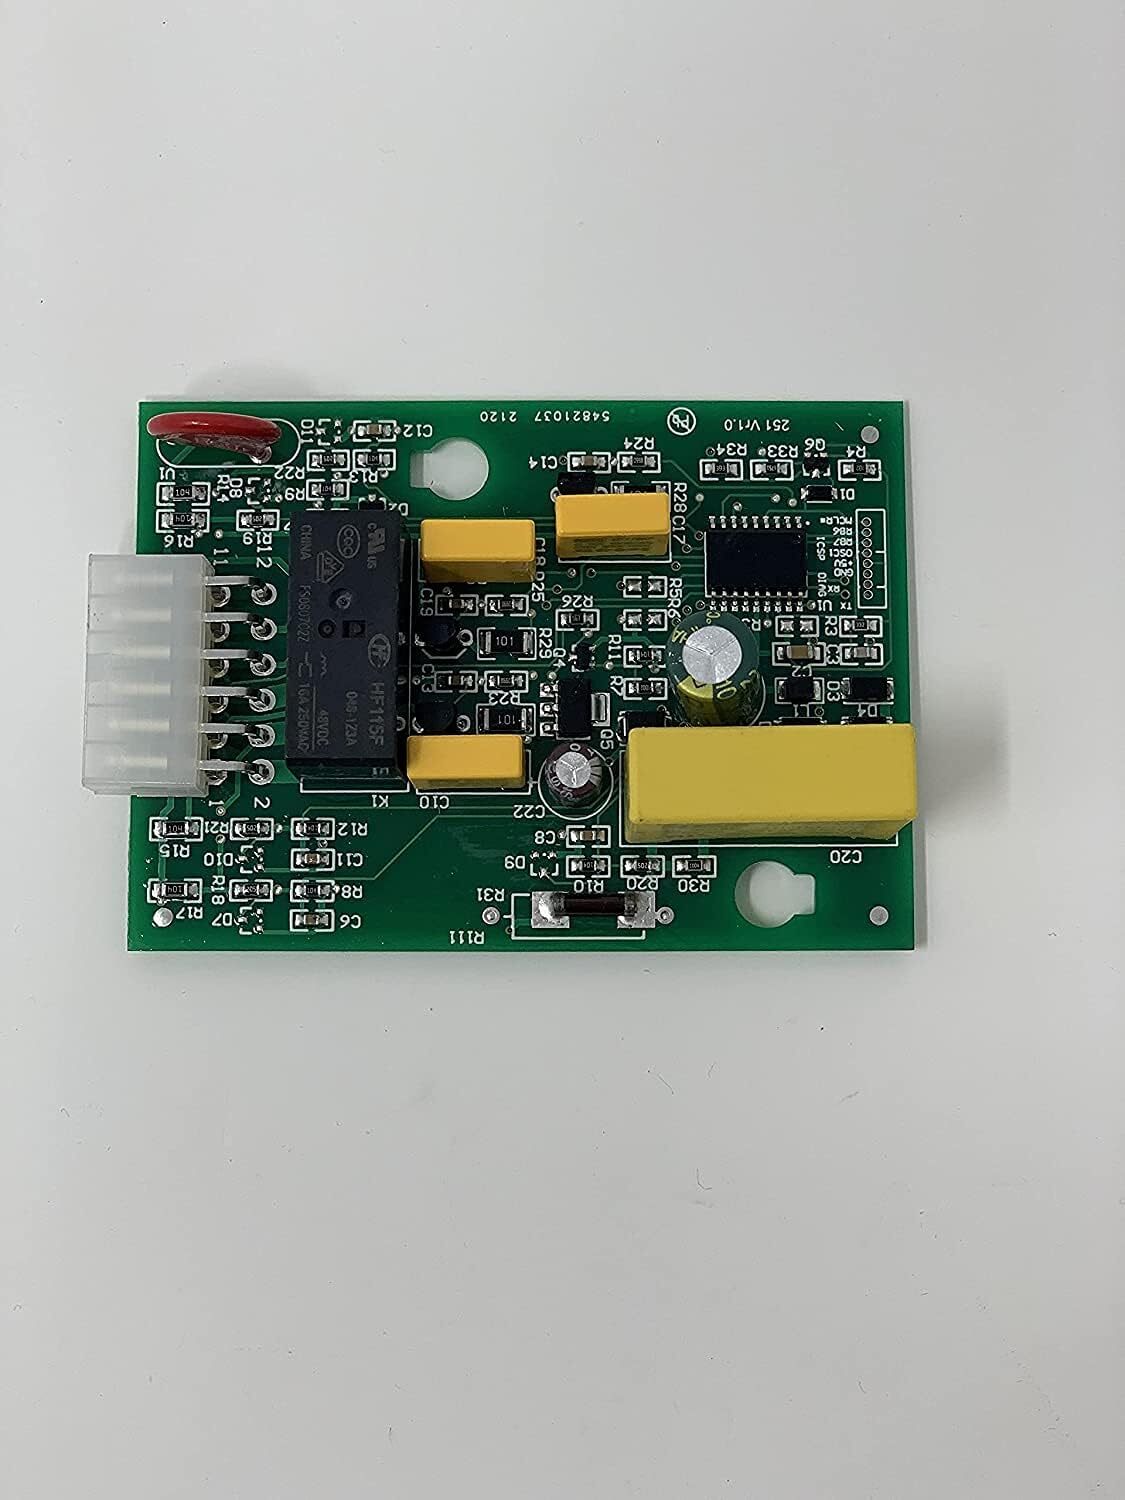 Adaptive Defrost Control Board for Frigidaire FRS23F4DQ1 Refrigerator